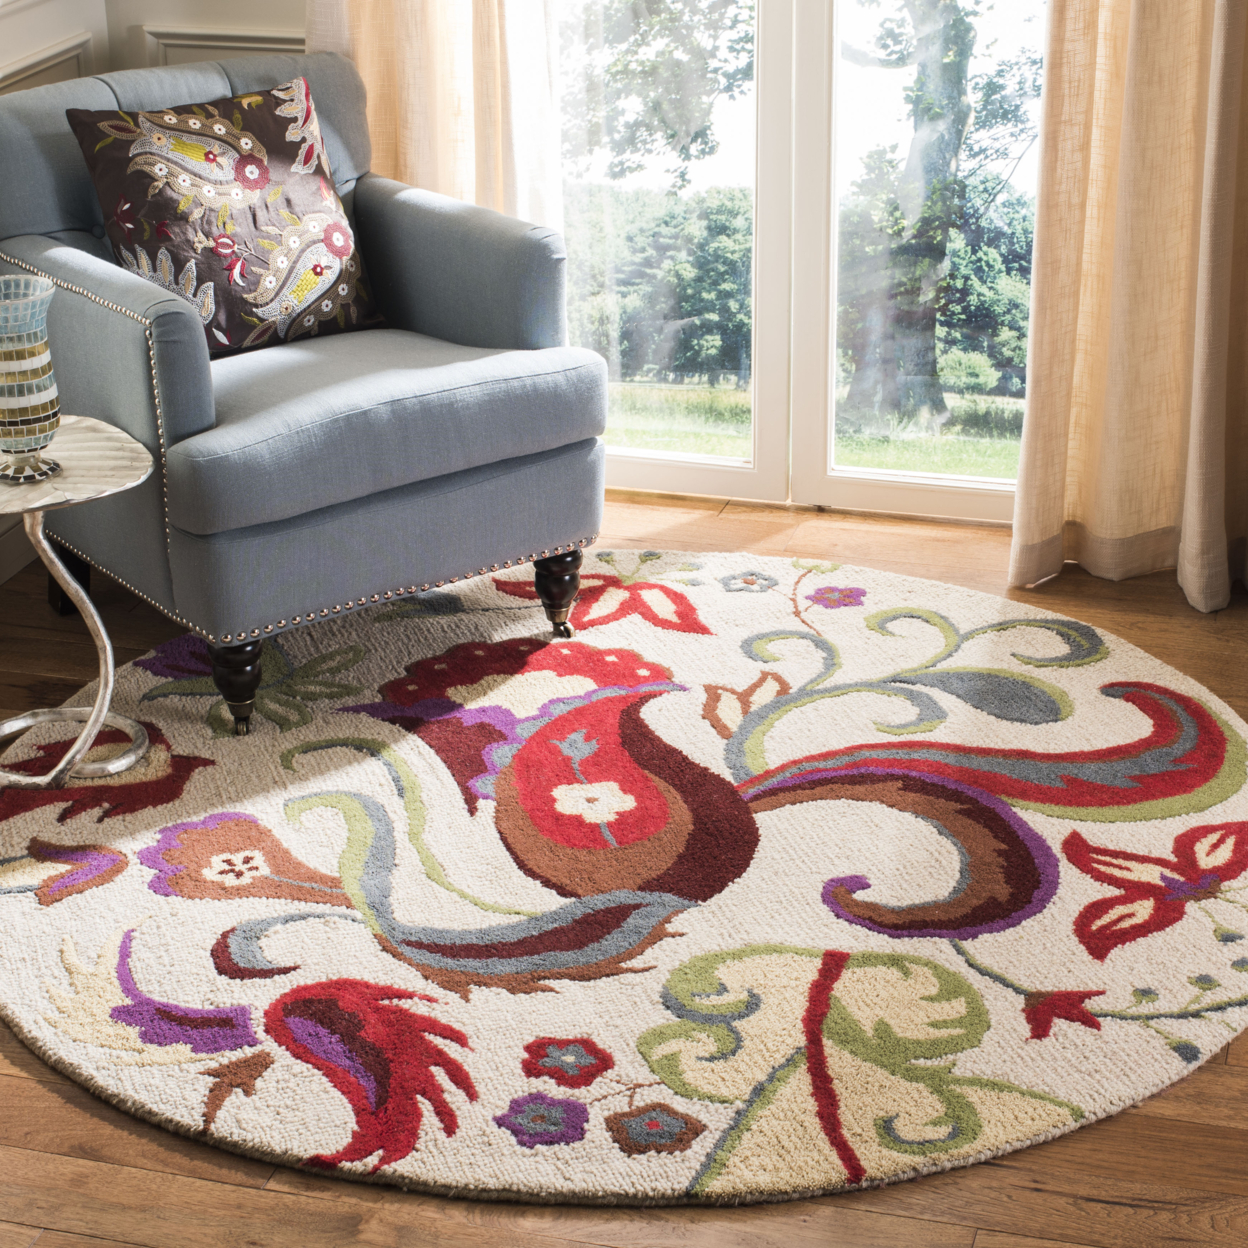 SAFAVIEH Blossom BLM680A Hand-hooked Beige / Multi Rug - 6' Square